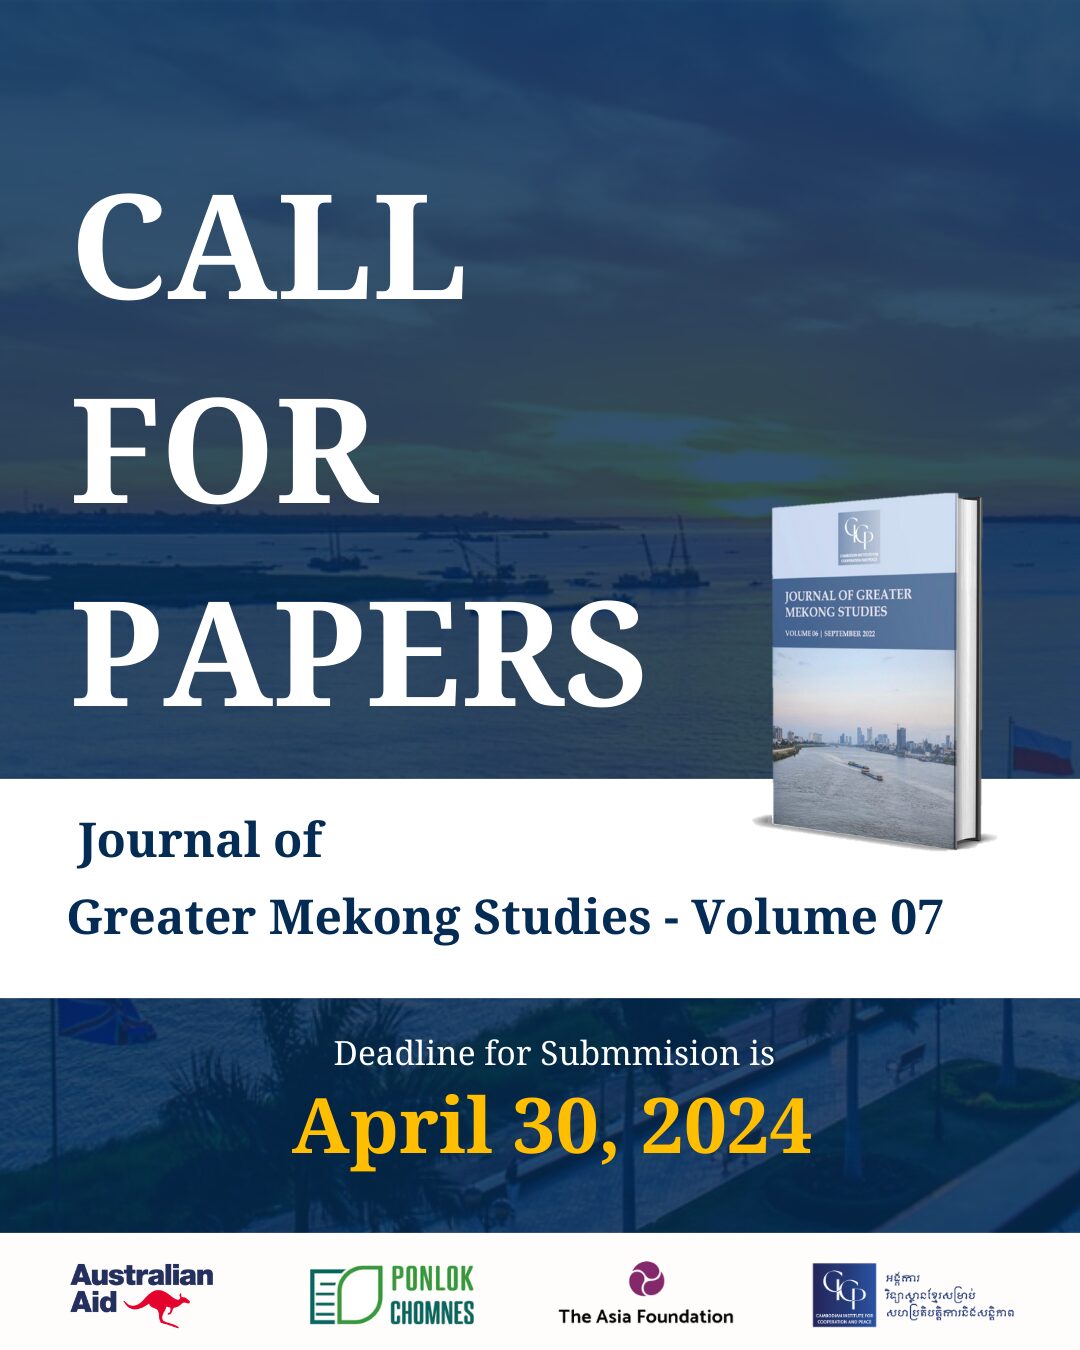 Call for Papers: Journal of Greater Mekong Studies, Volume 07-